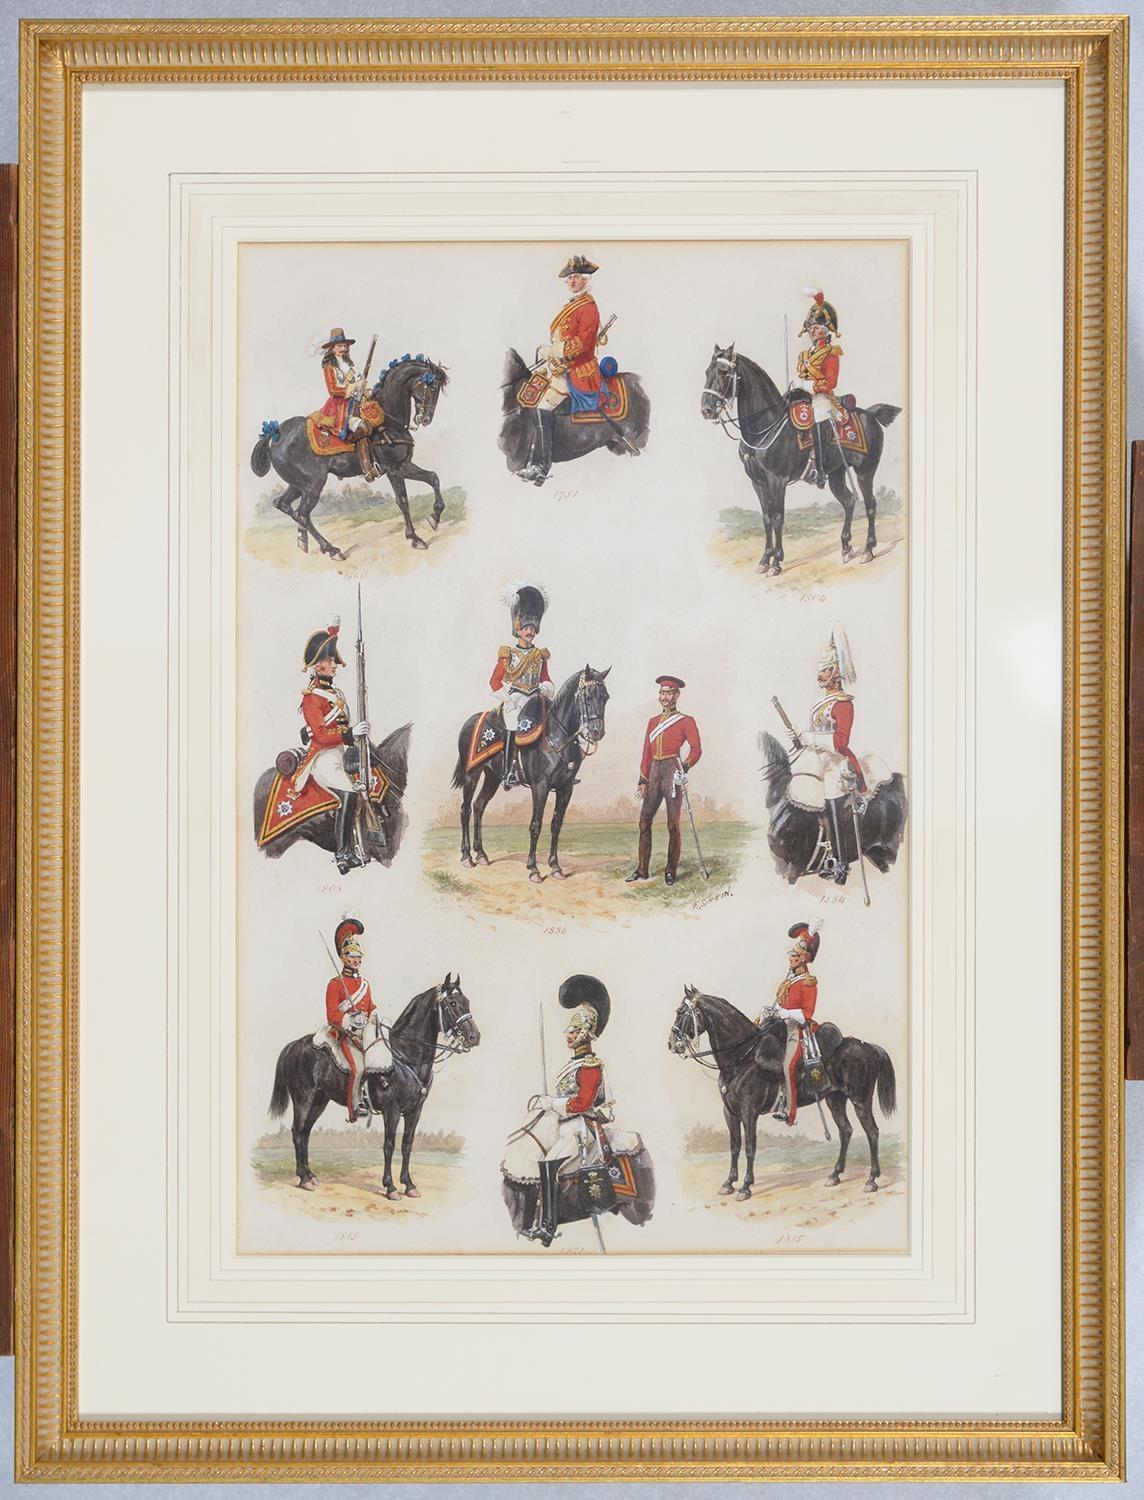 RICHARD SIMKIN (1850-1926) - UNIFORMS OF THE LIFE GUARDS 1660-1854, SIGNED, WATERCOLOUR, 45 X 30CM - Image 2 of 3